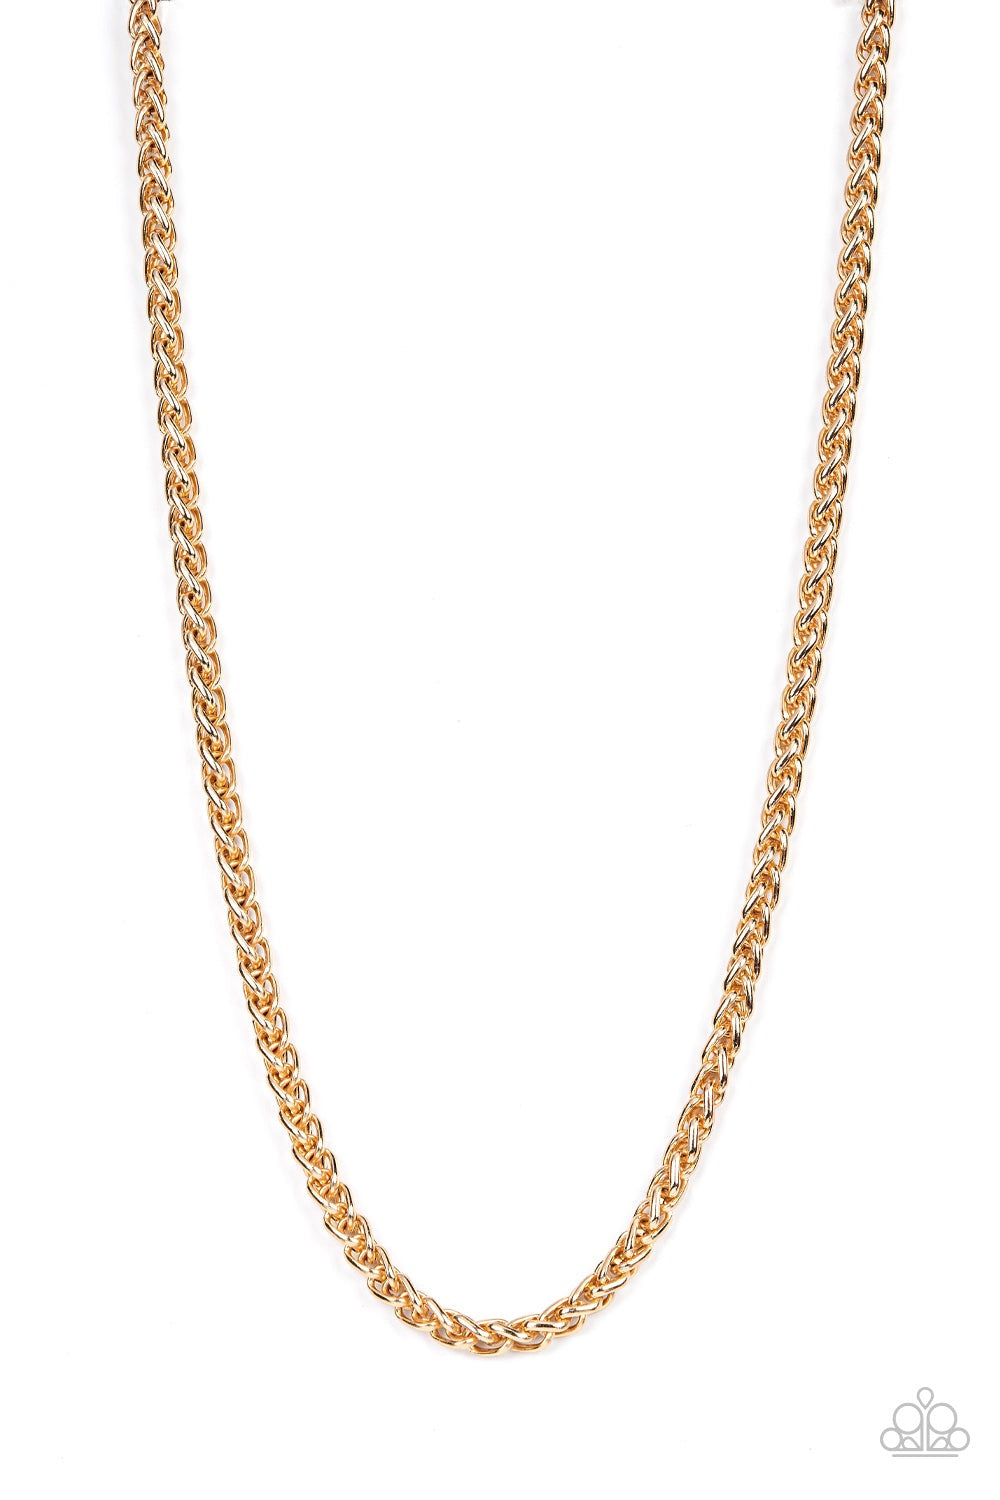 METRO MONOPOLY GOLD-NECKLACE